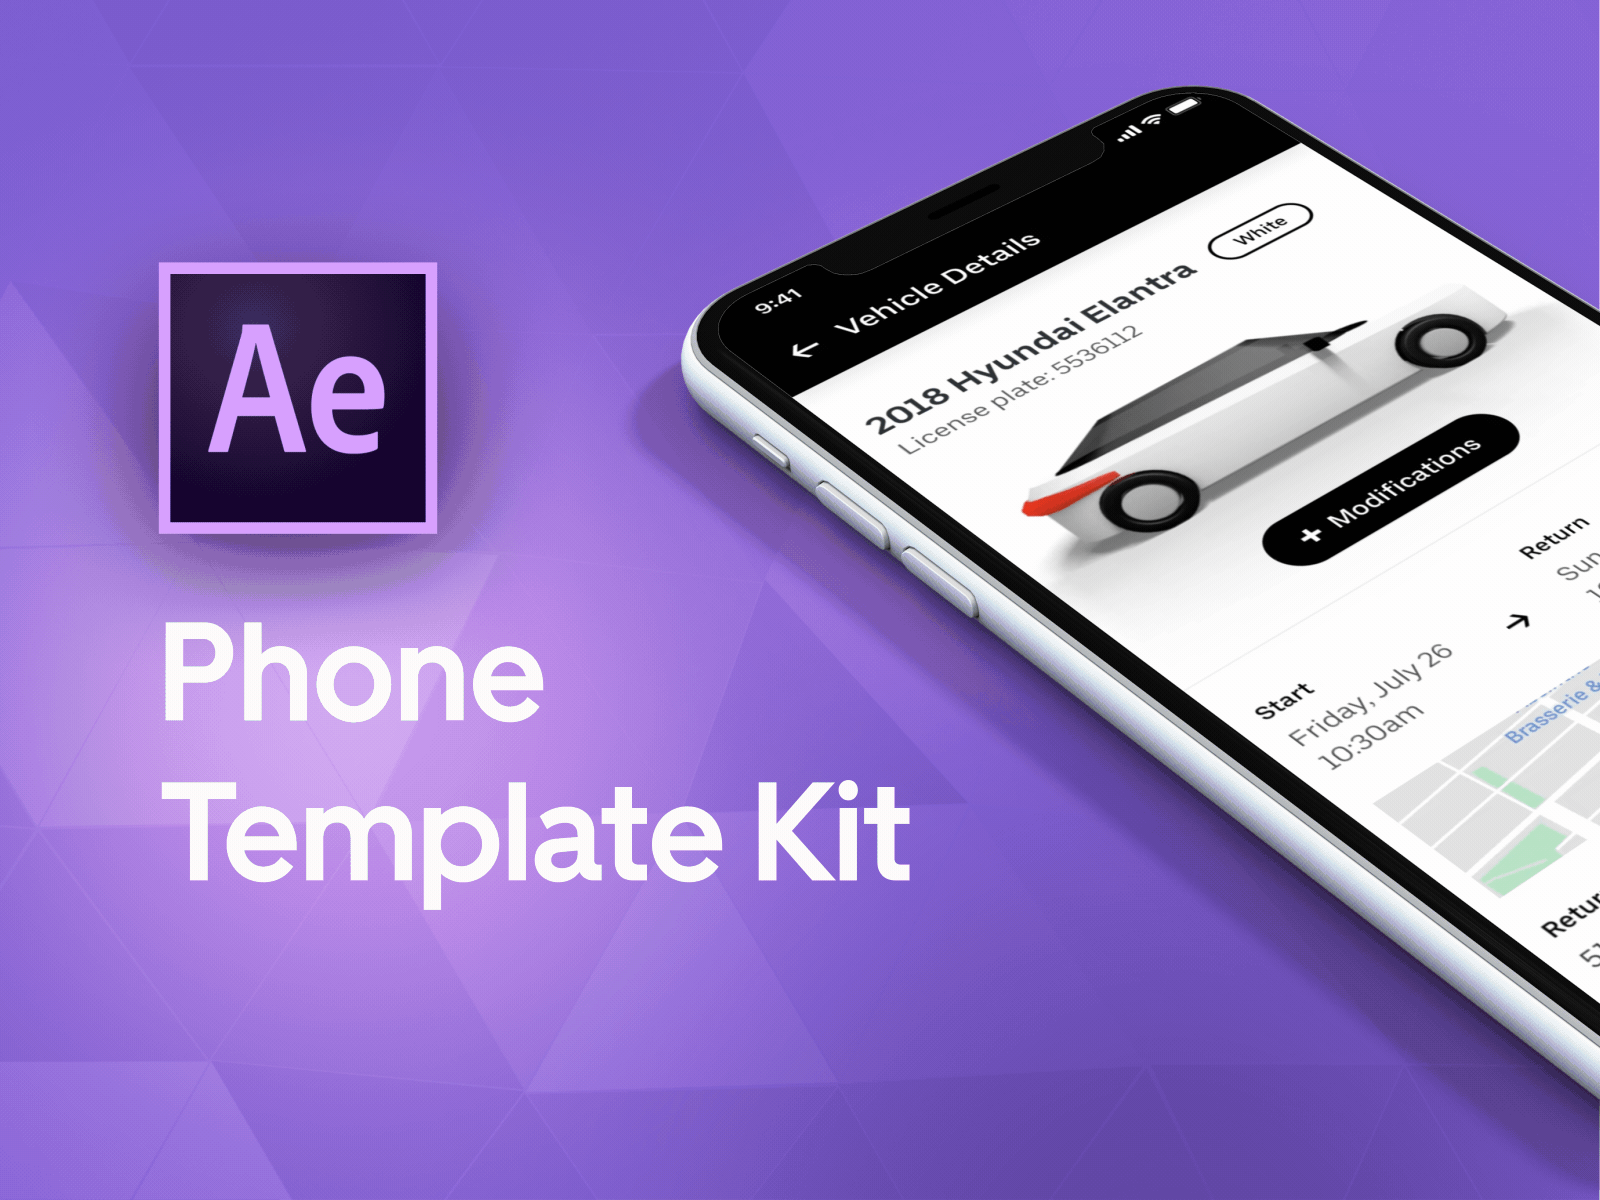 Download Free After Effects 3D Phone Templates by Brett Banning on ...